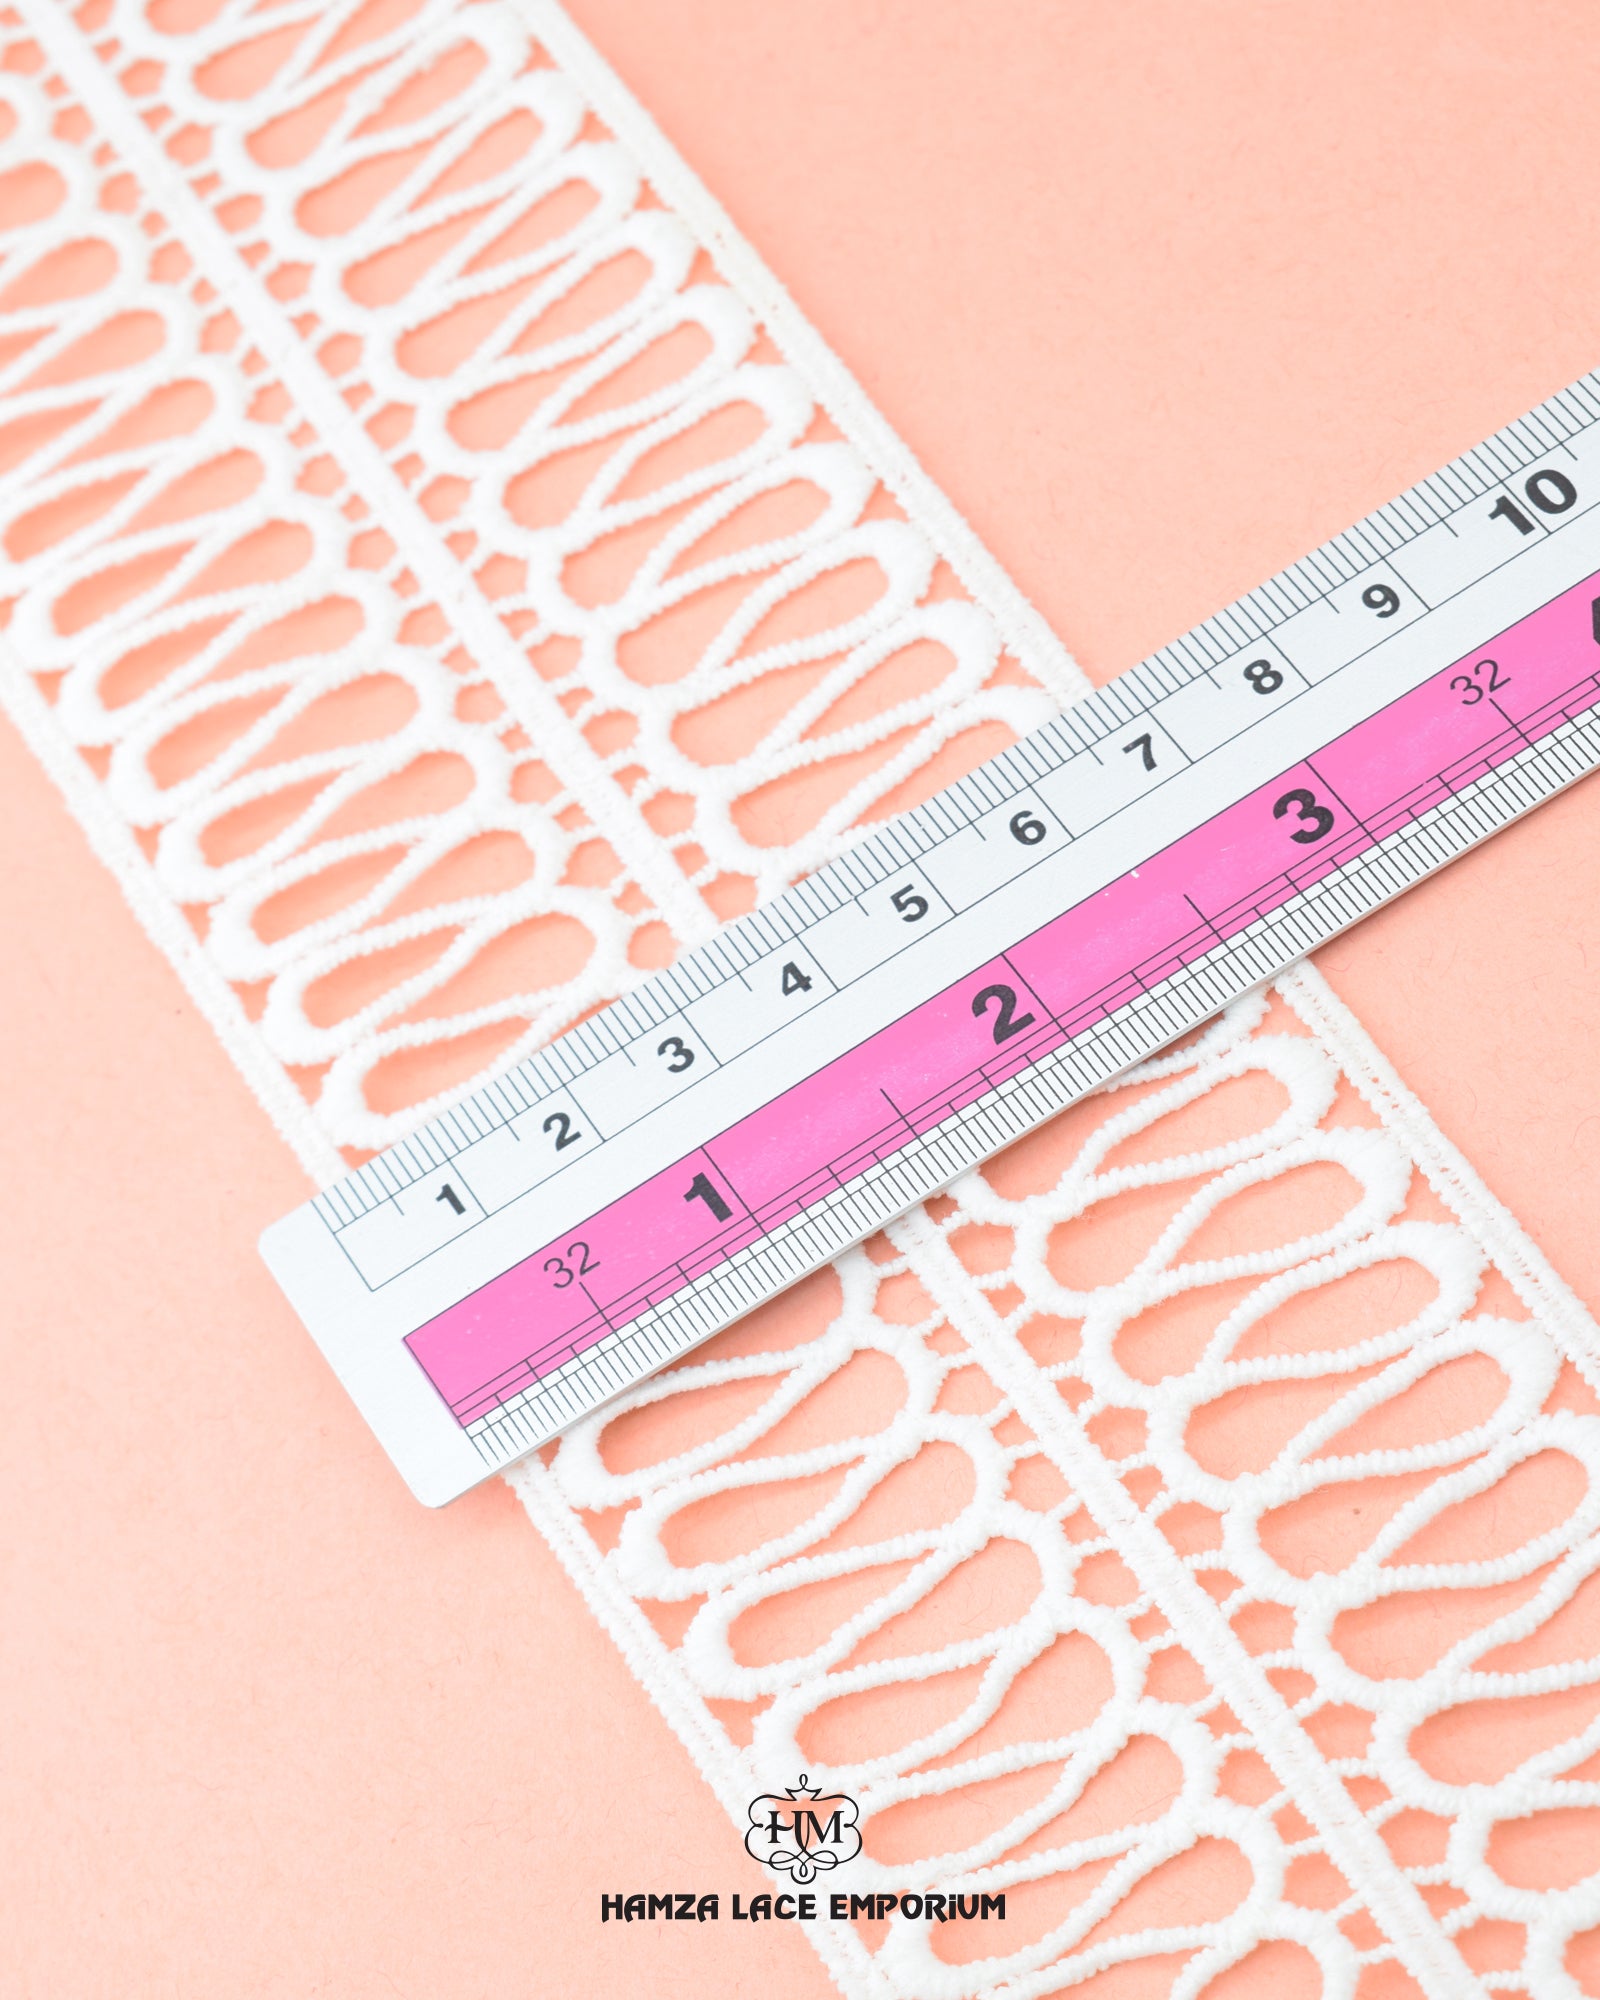 Size of the 'Center Loop Lace 23337' is given as '3' inches by placing a ruler on it